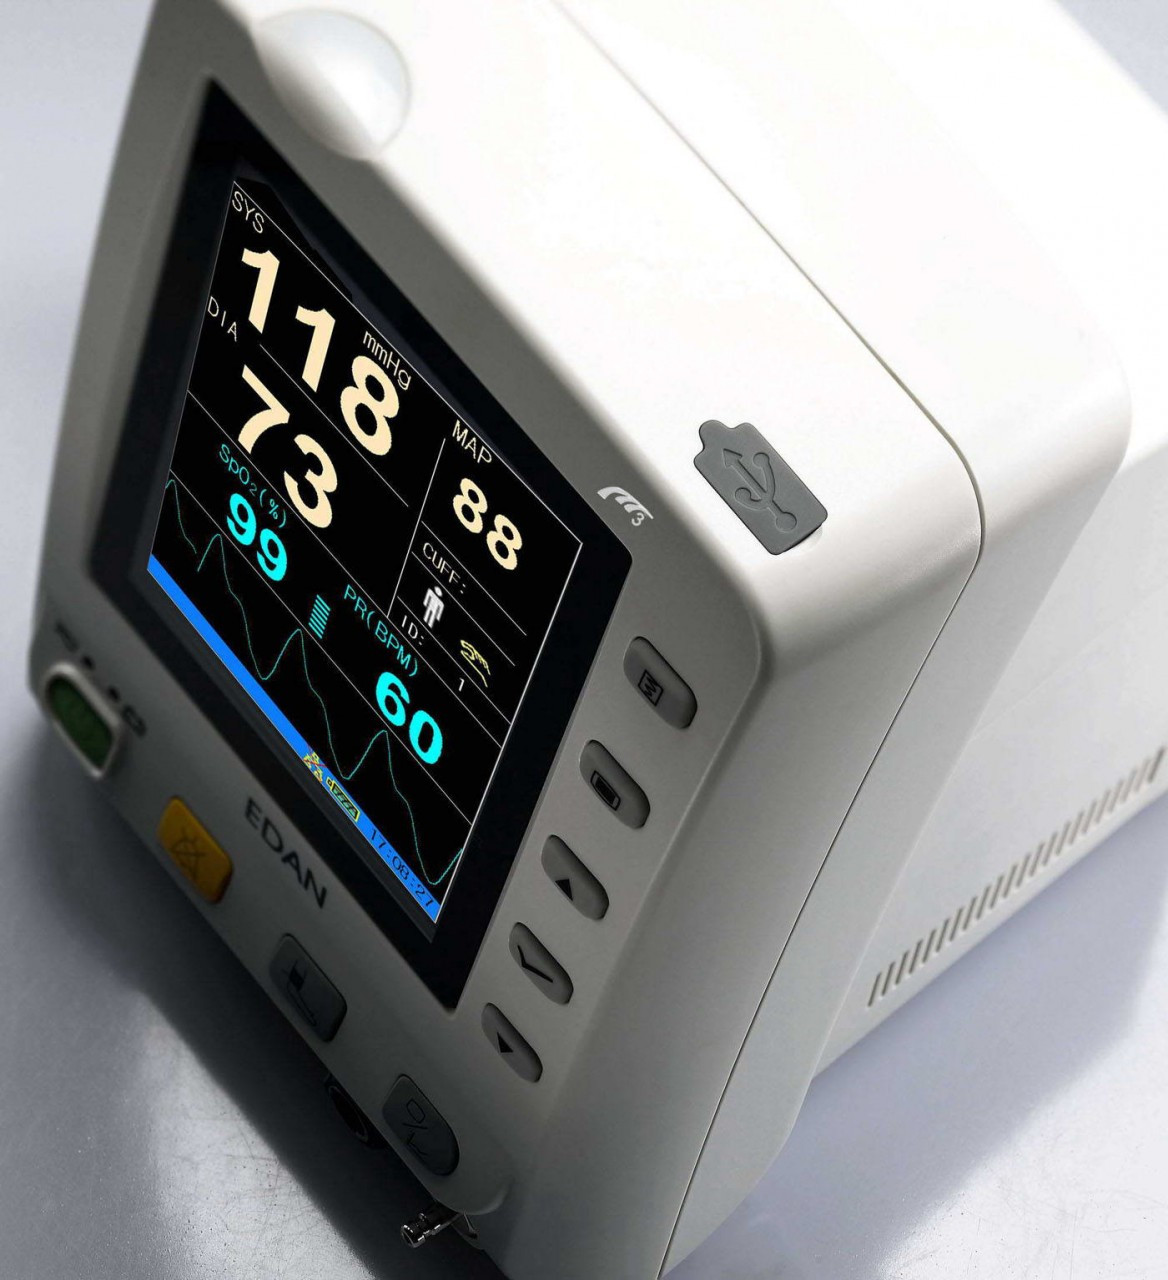 PM50 Ambulatory Blood Pressure Monitor ABPM with Spo2/NIBP by Facelake